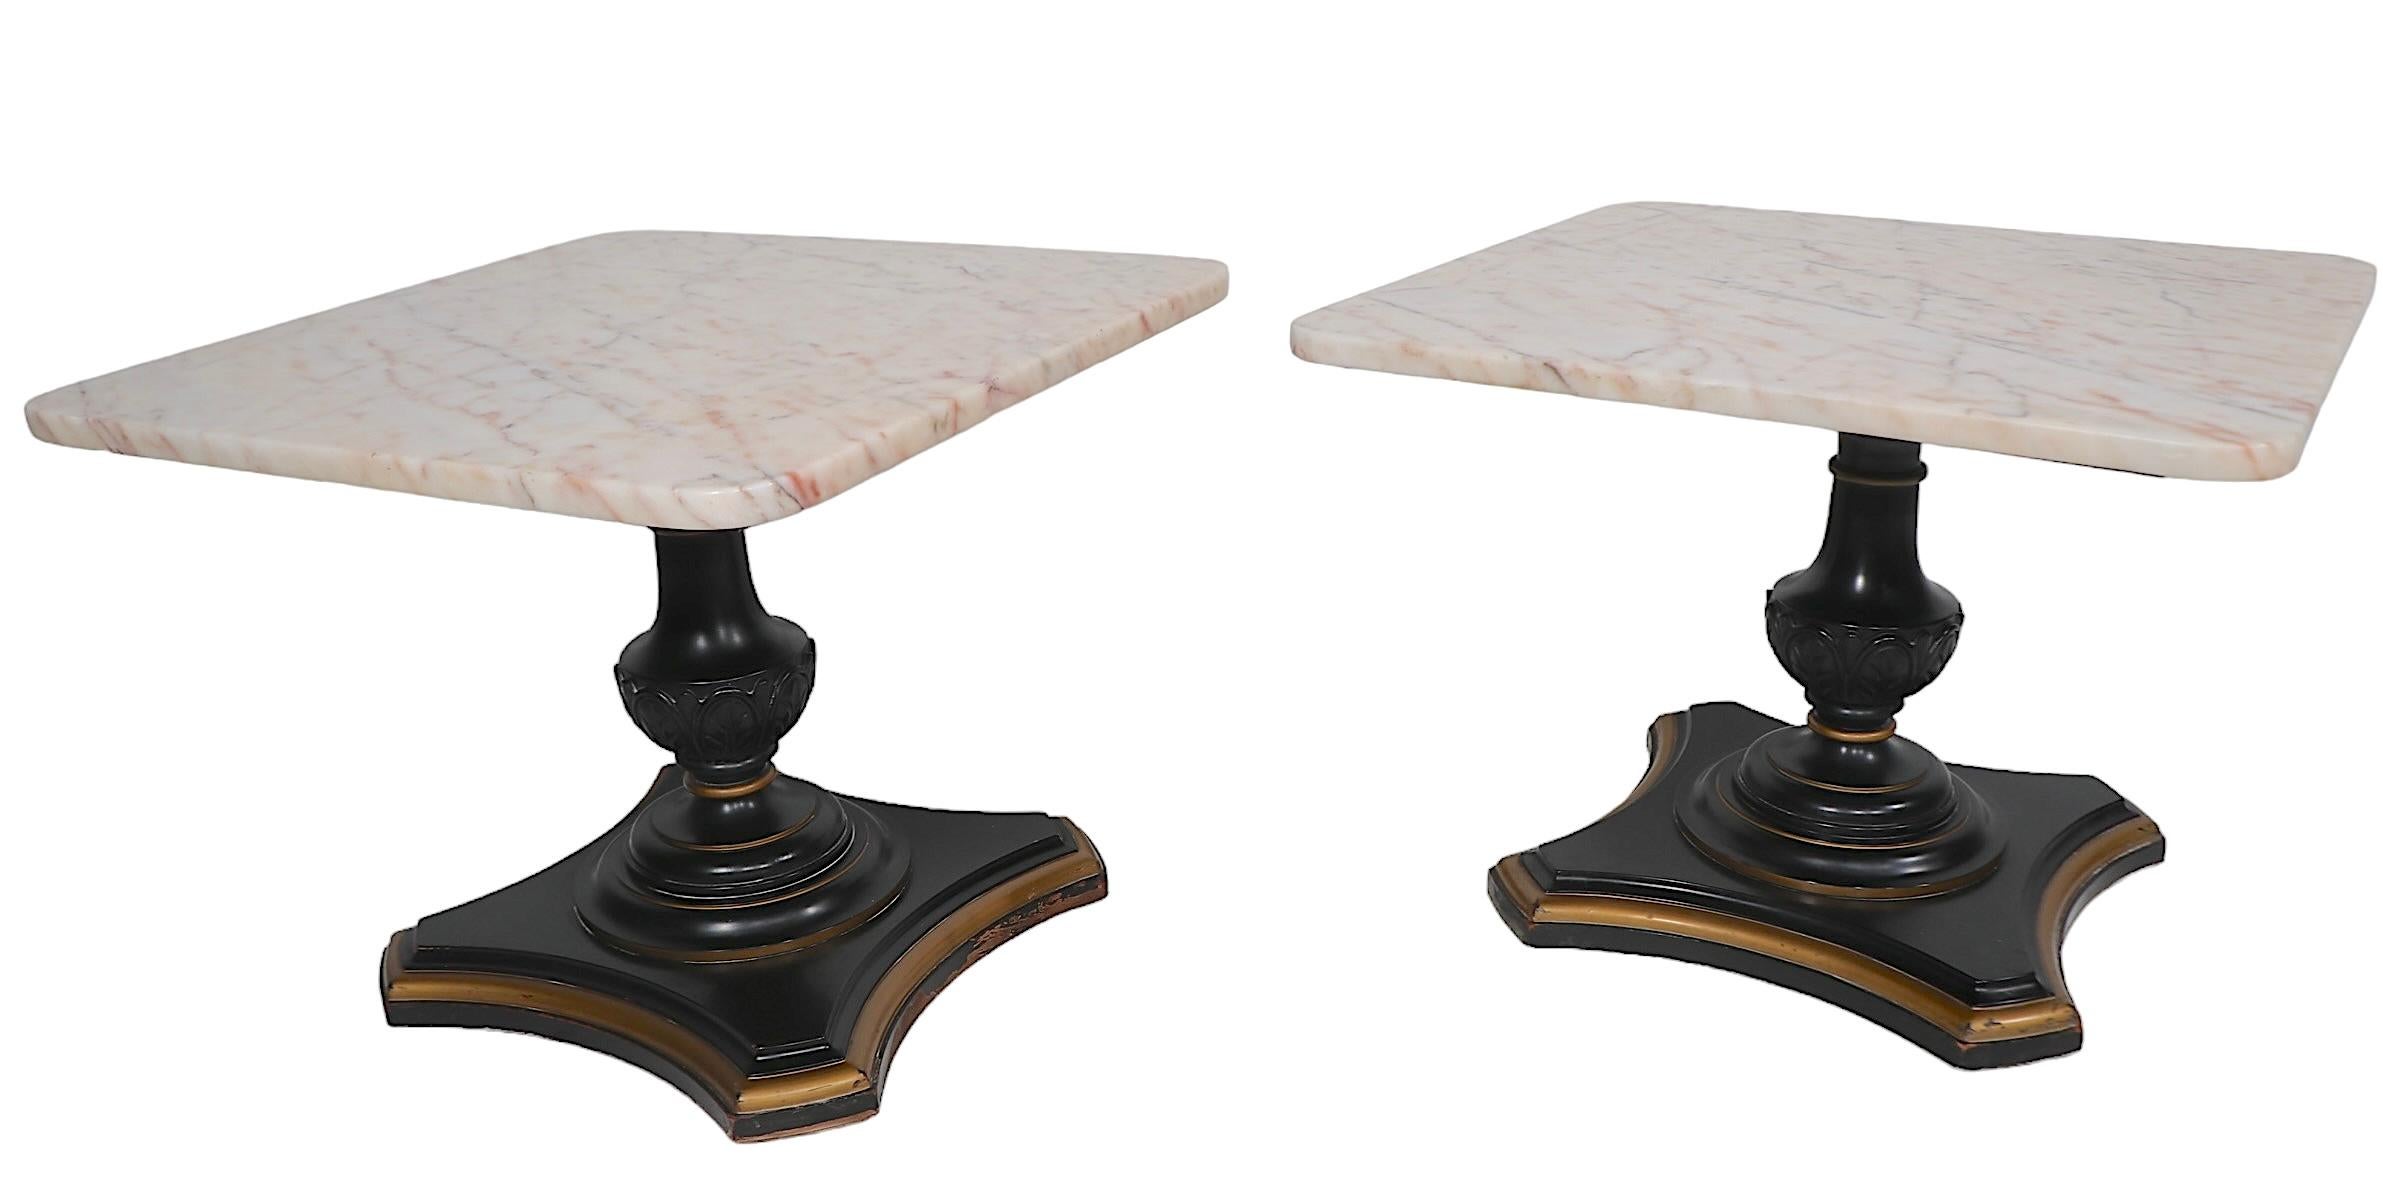 Pr. Marble Top  Neo Classical Hollywood Regency Side End Tables c 1940-1960's For Sale 3